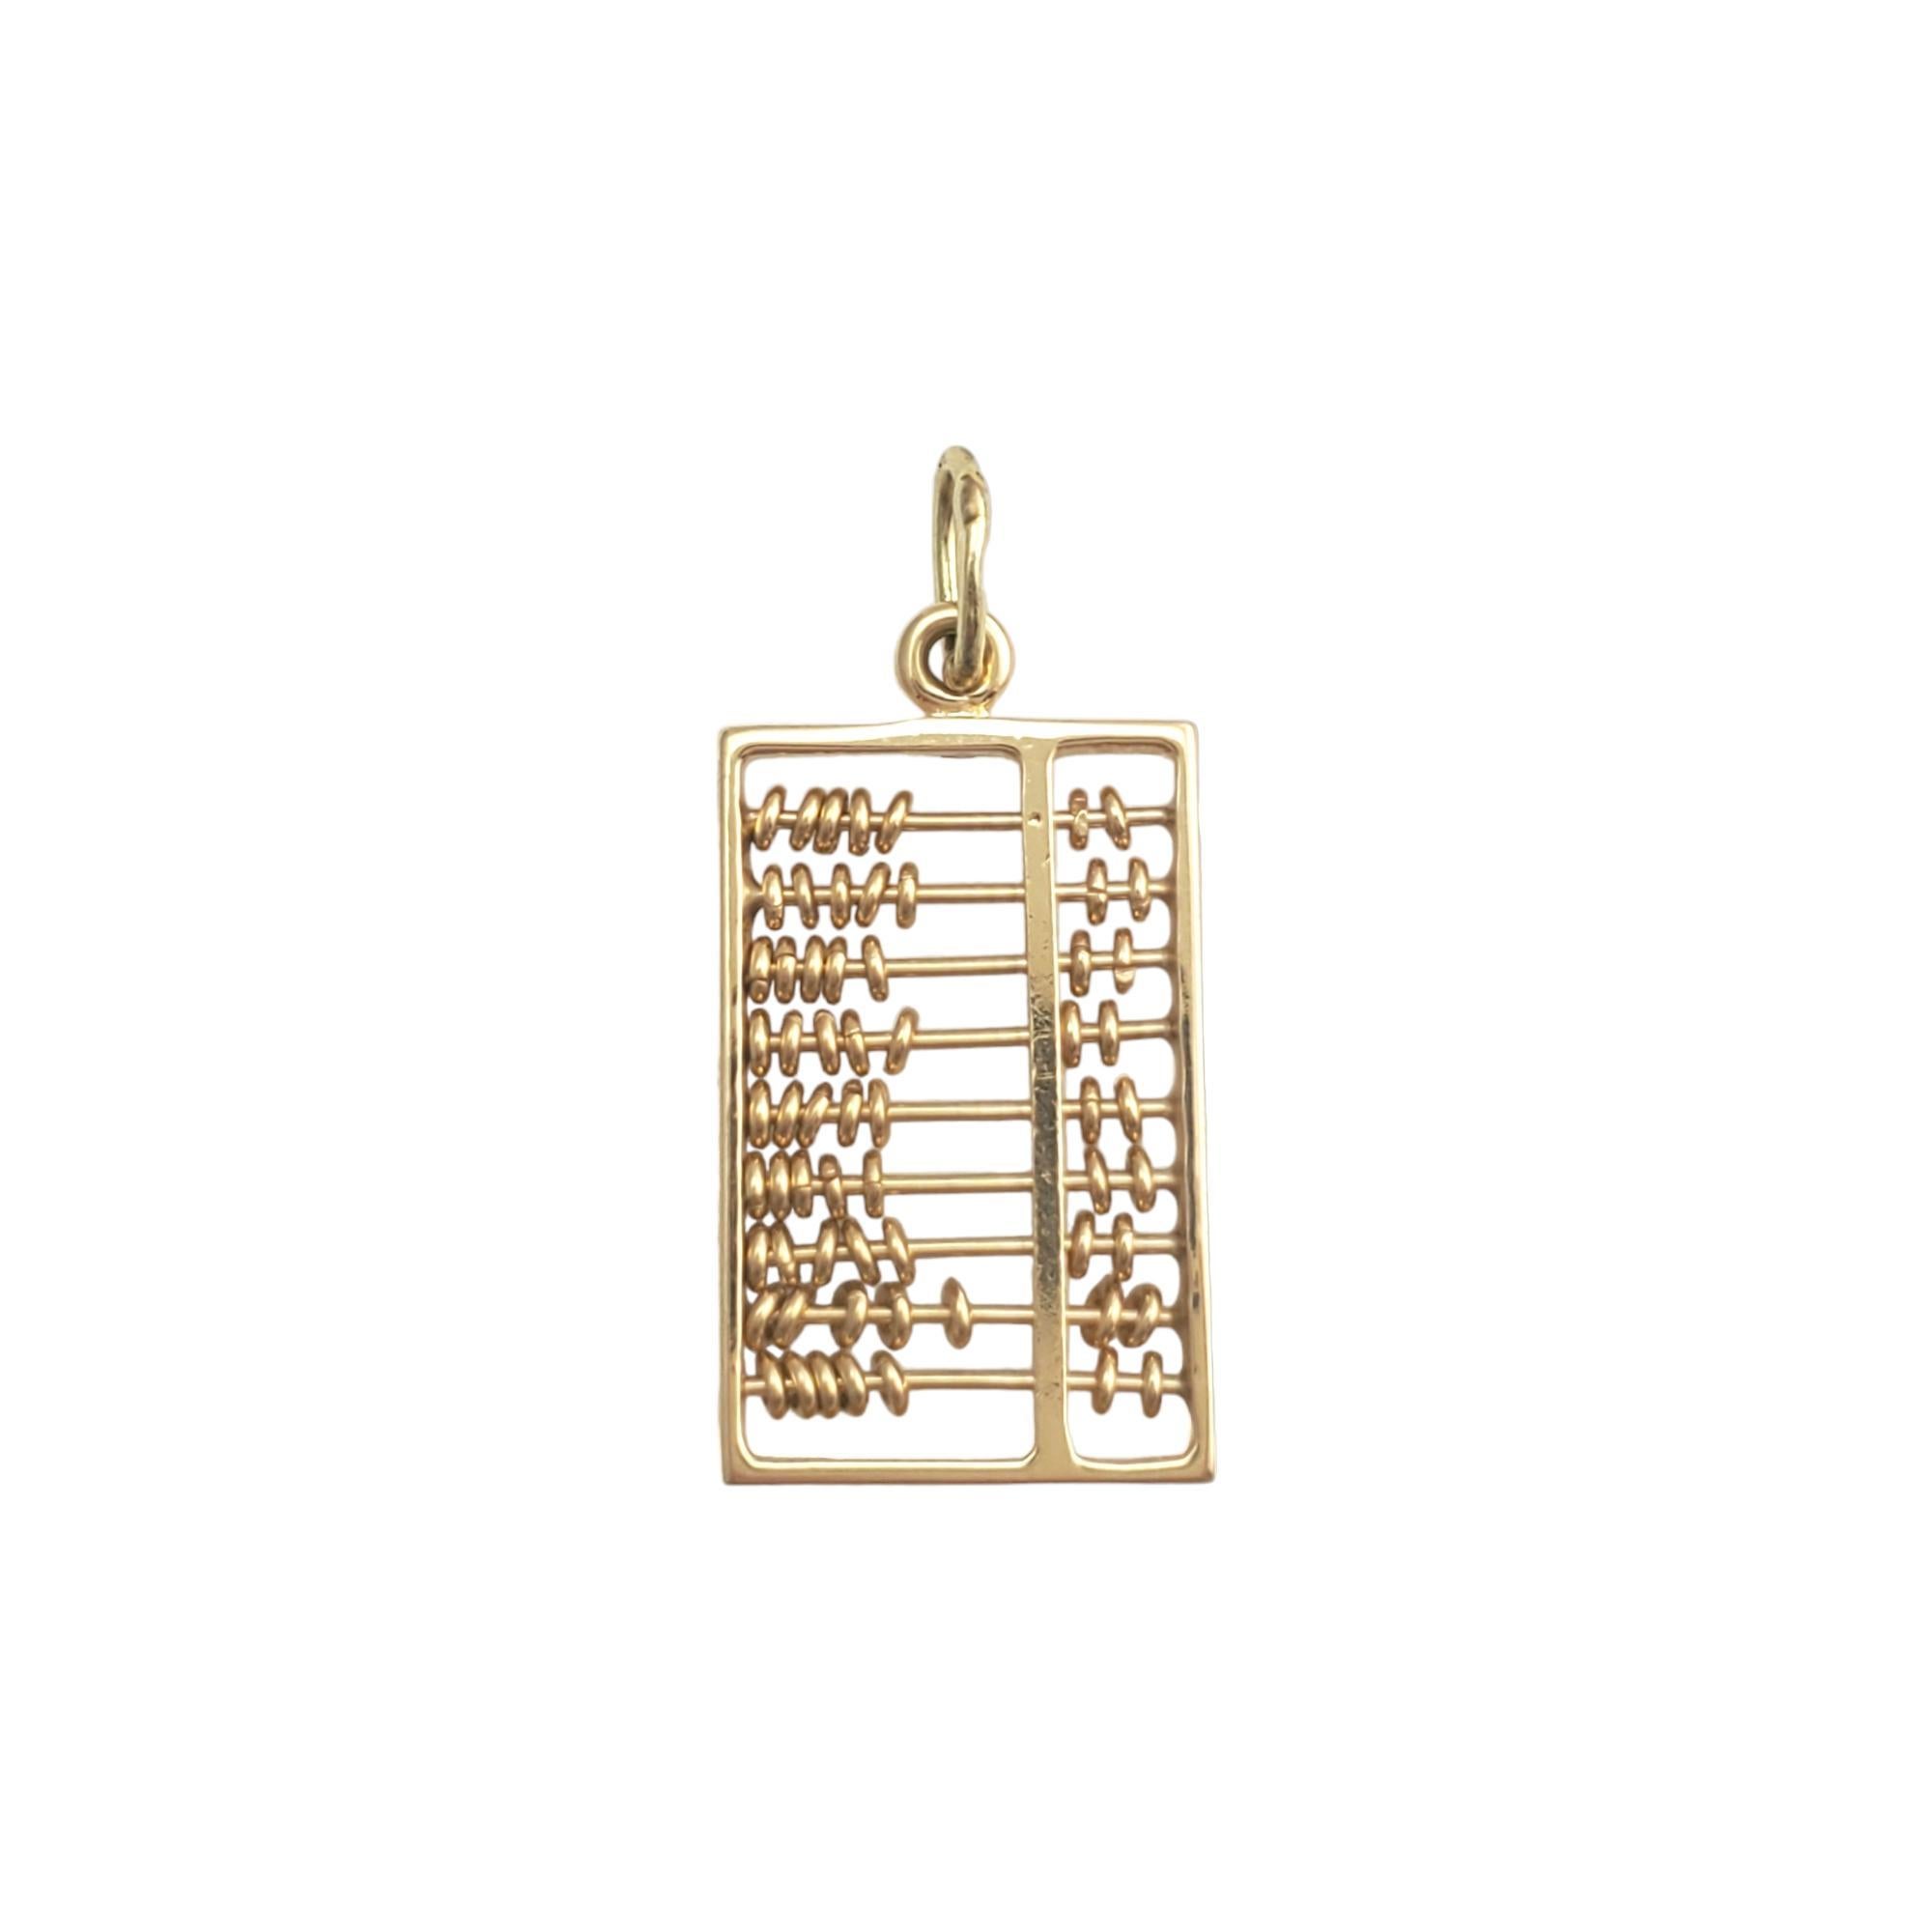 Vintage 14K Yellow Gold Abacus Charm with Sliding Beads - 

This simple charm is crafted in meticulously detailed 14K yellow gold. 
 
Size: 22.21mm X 2.18 mm

Weight: 1.4 dwt. / 2.3 gr.

Marked: 14K C

Very good condition, professionally